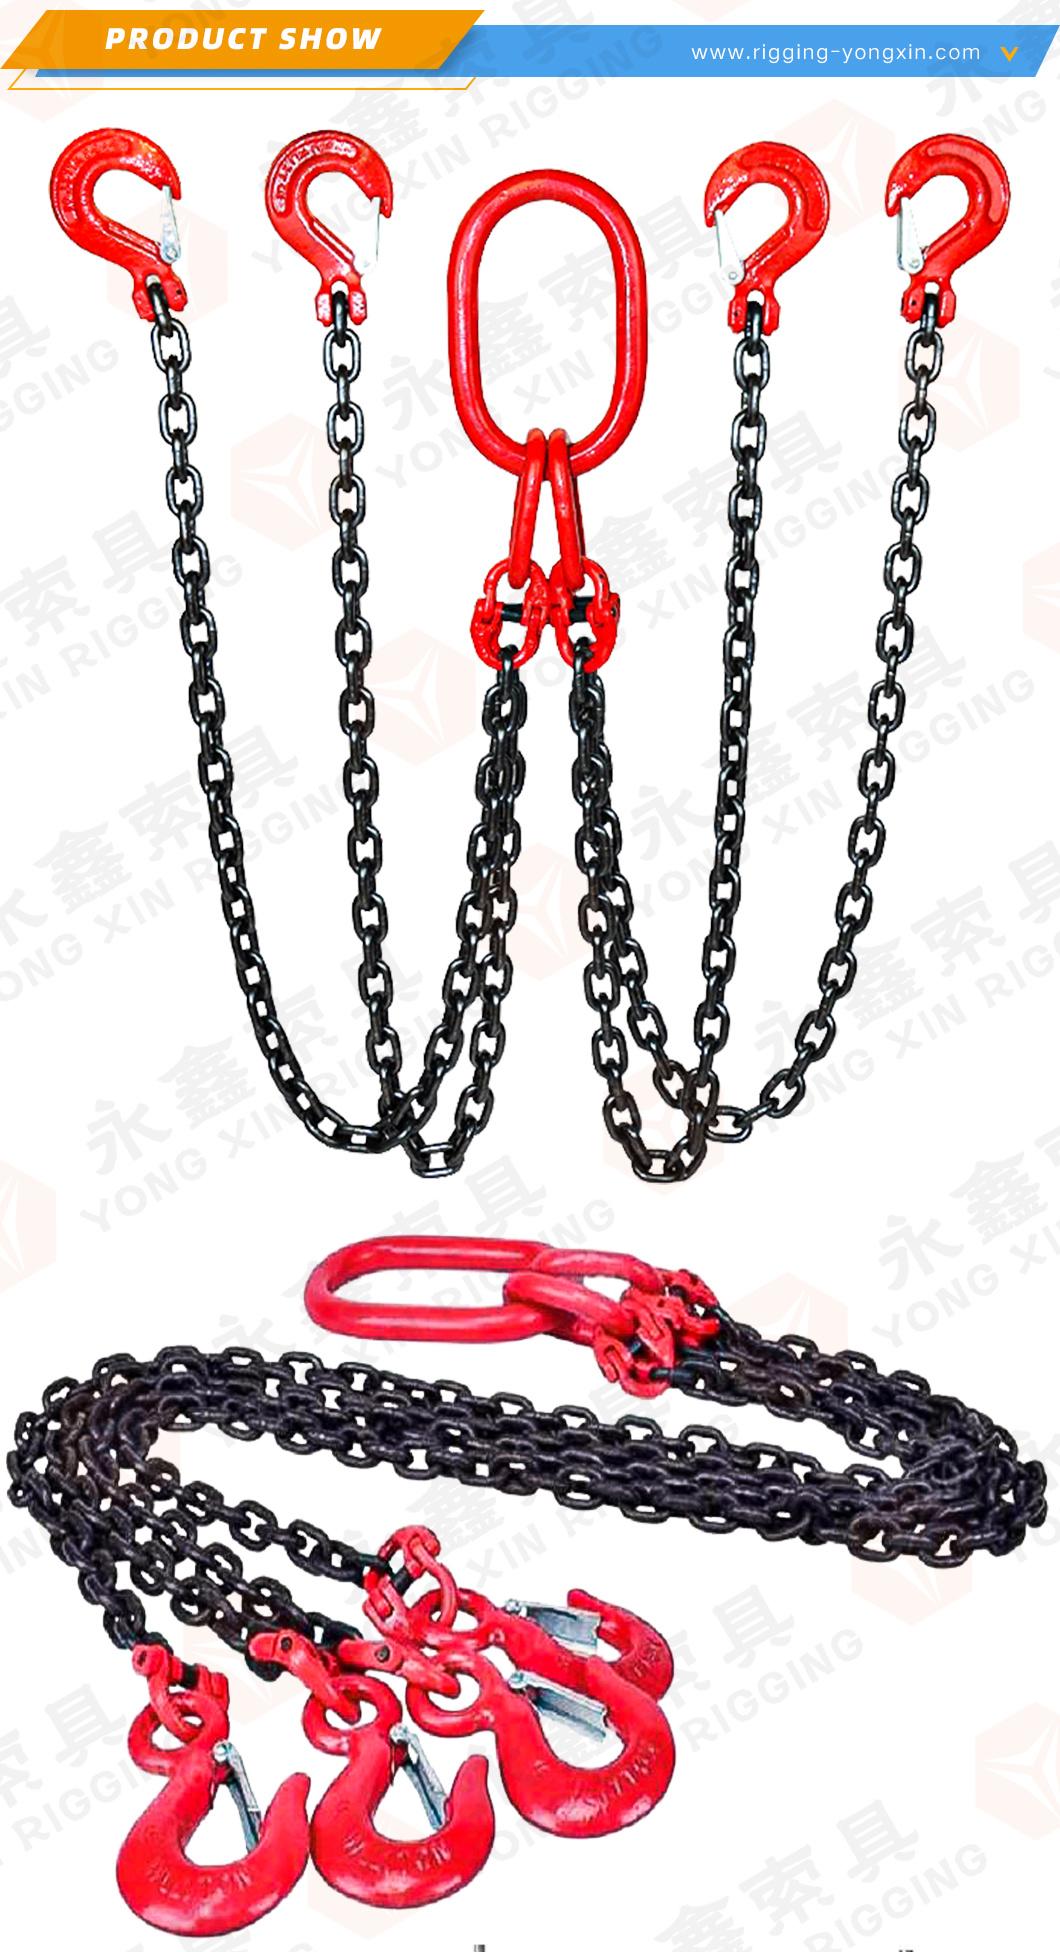 OEM Sling 3ton G80 Red Choker Crane Webbing Oil Drum Master Link Chain Slings for Lifting Chains Factory|Sling Chain with Hook Lifting Chain